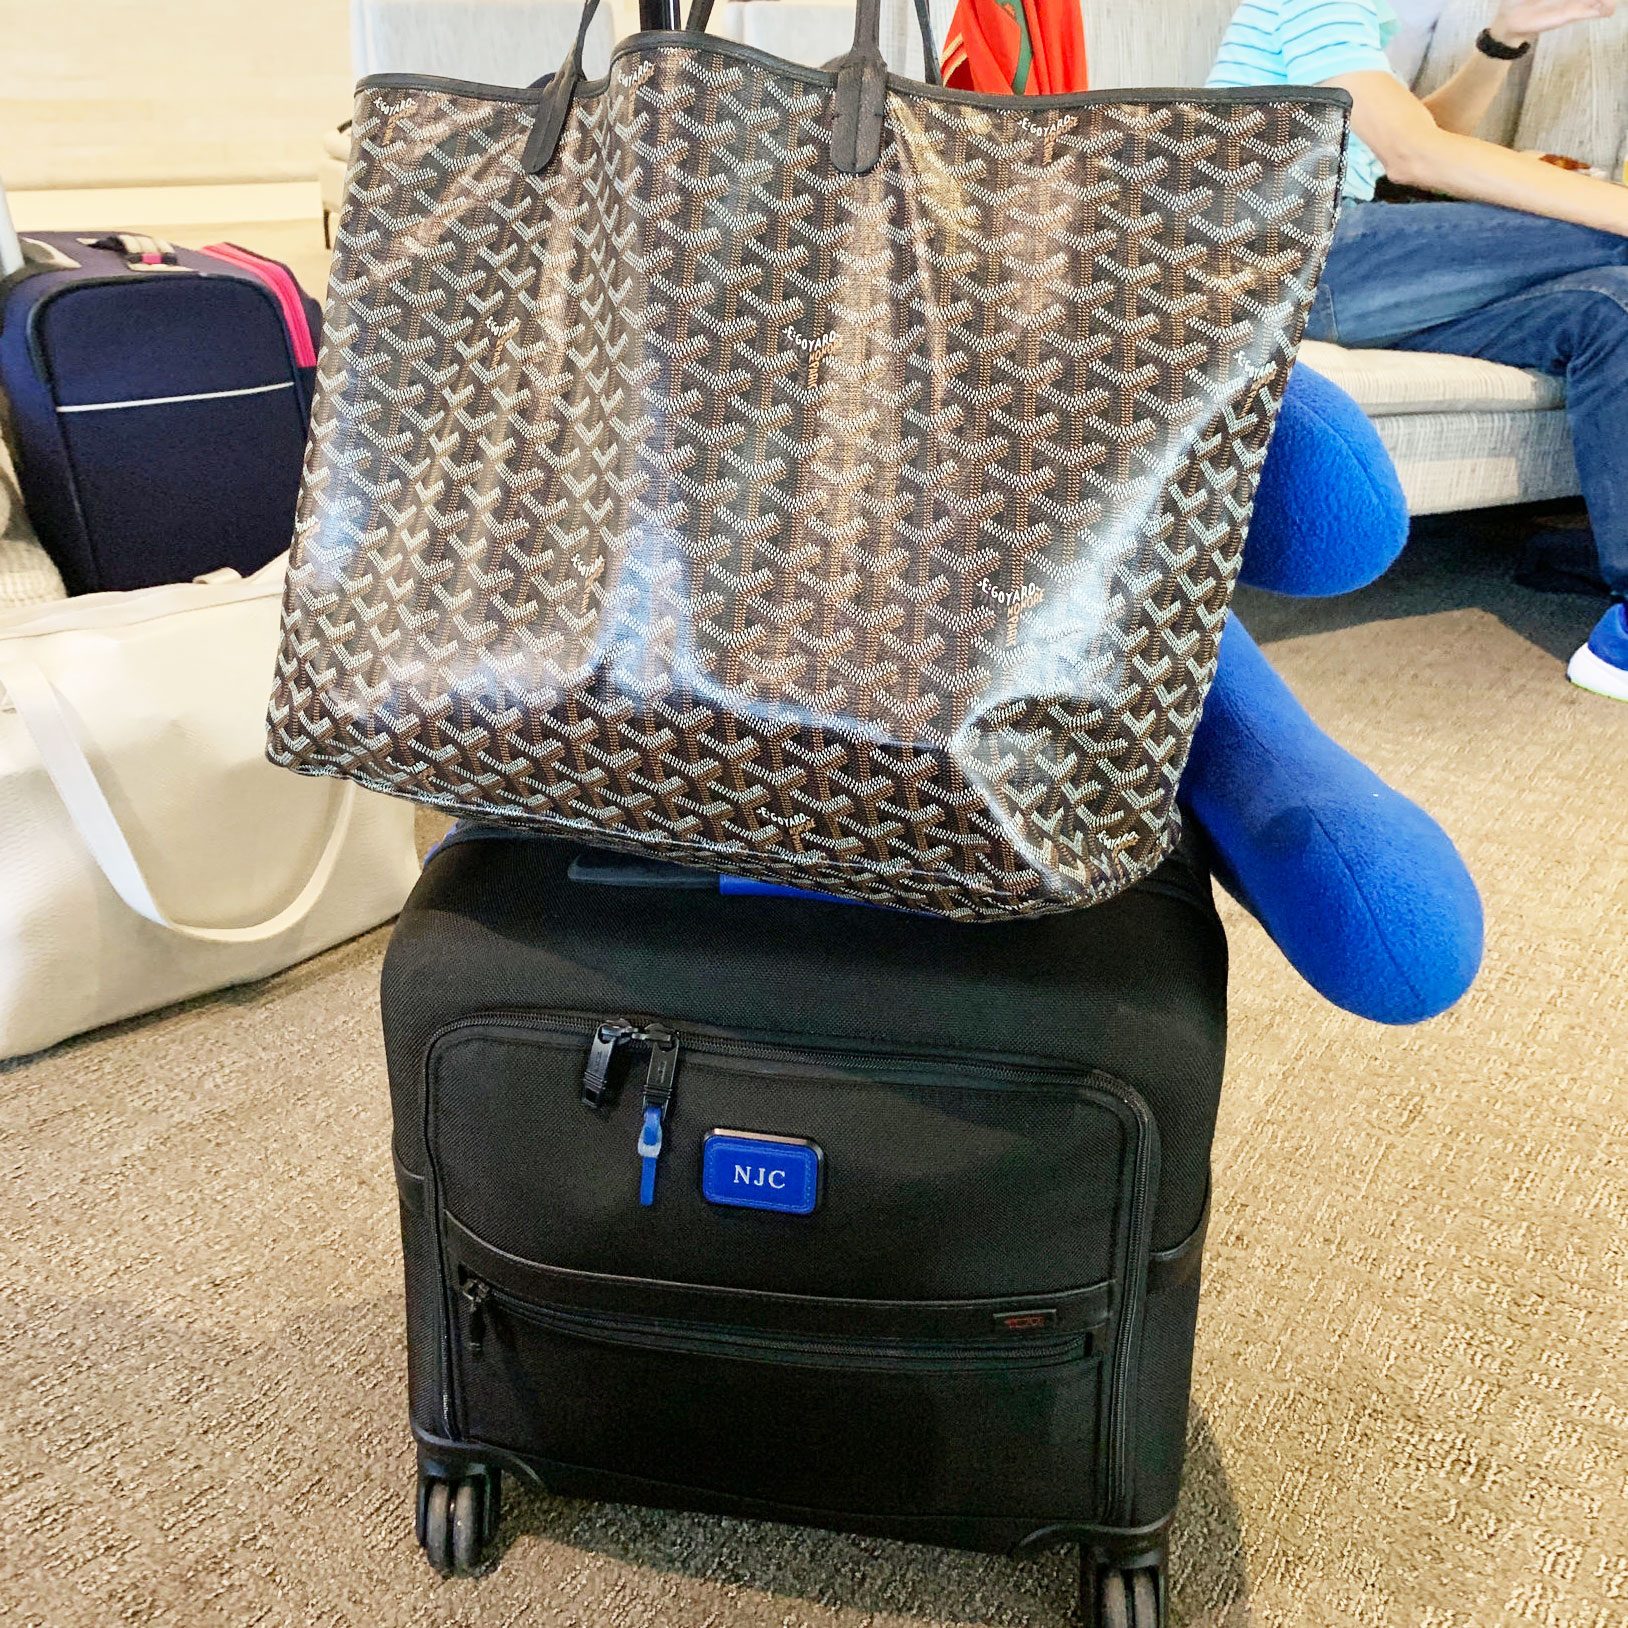 What's In My Bag: International Flight Louis Vuitton Carry On